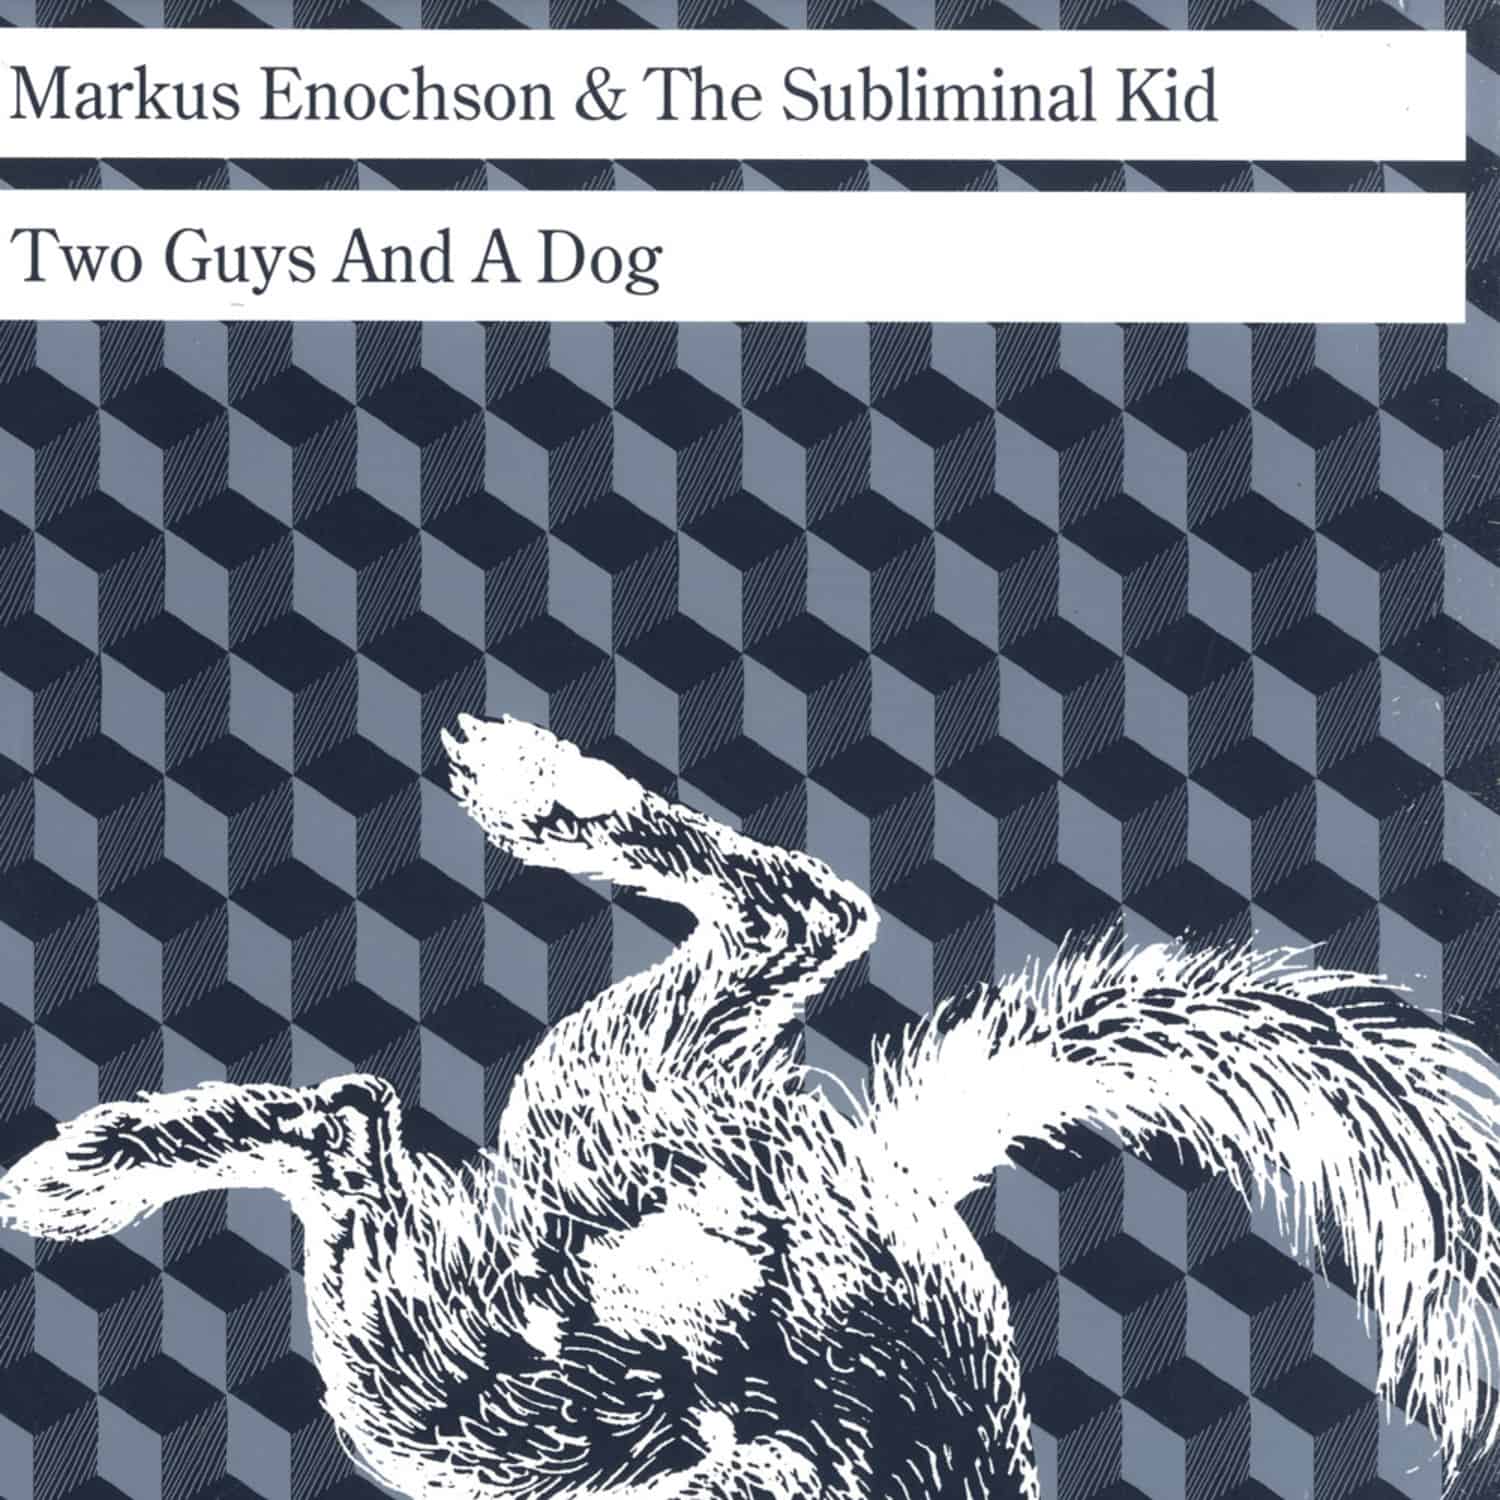 Markus Enochsen & The Subliminal Kid - TWO GUYS AND A DOG